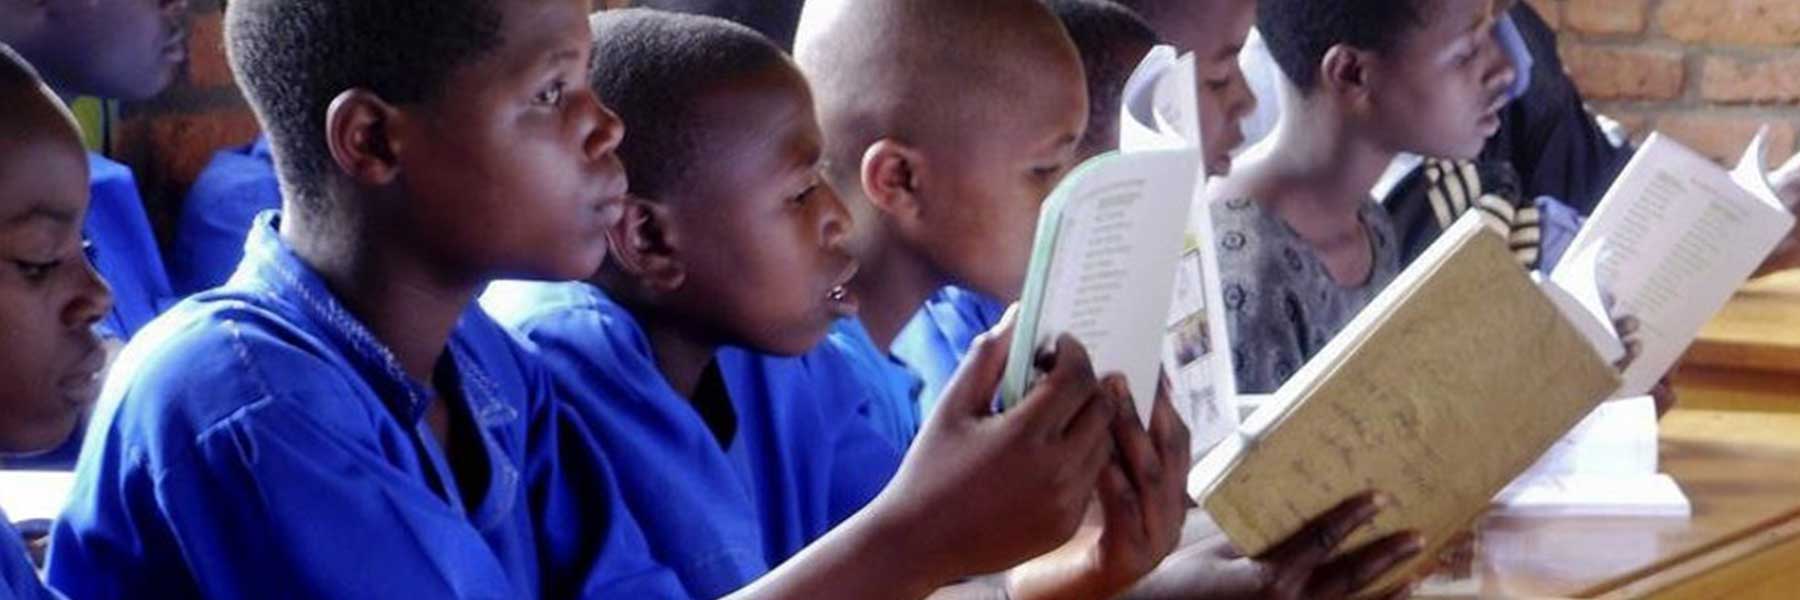 Young students read books.